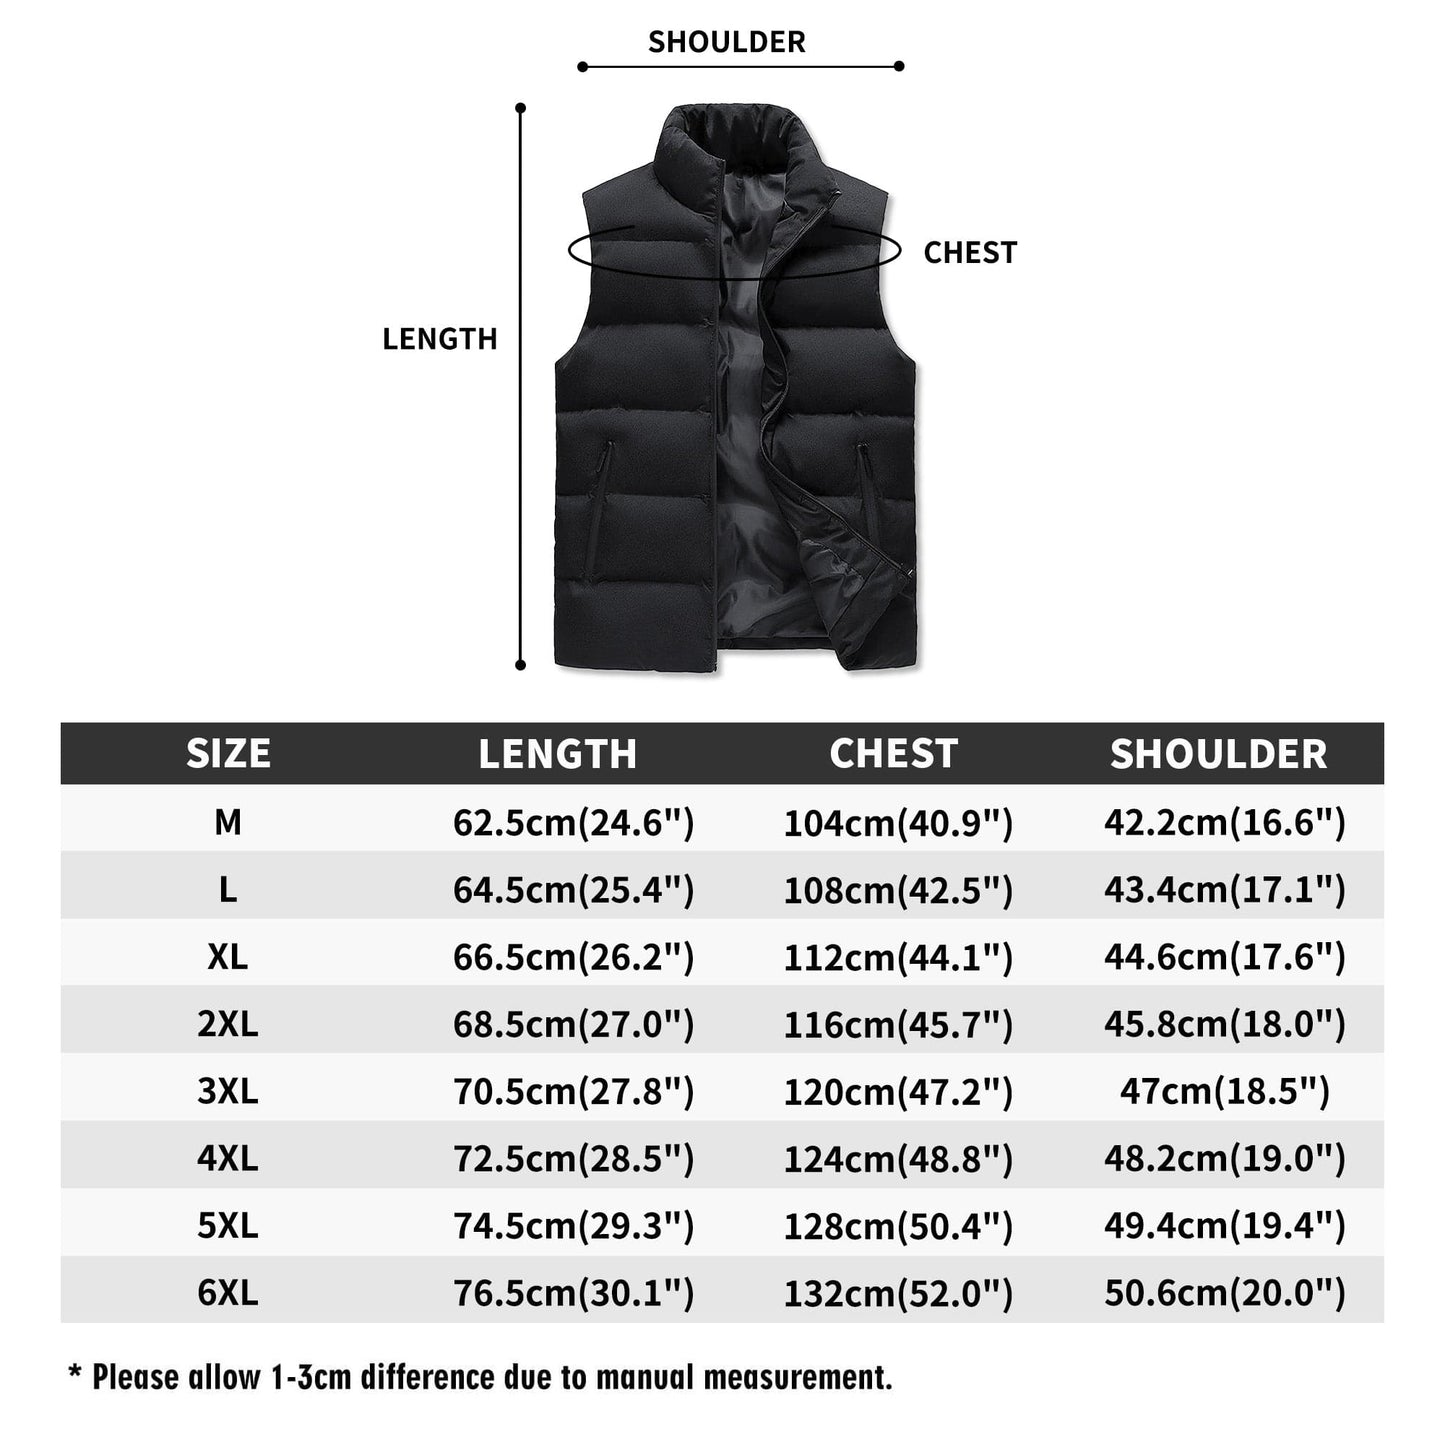 Mens Rugged American Flag Zip Up Puffer Vest